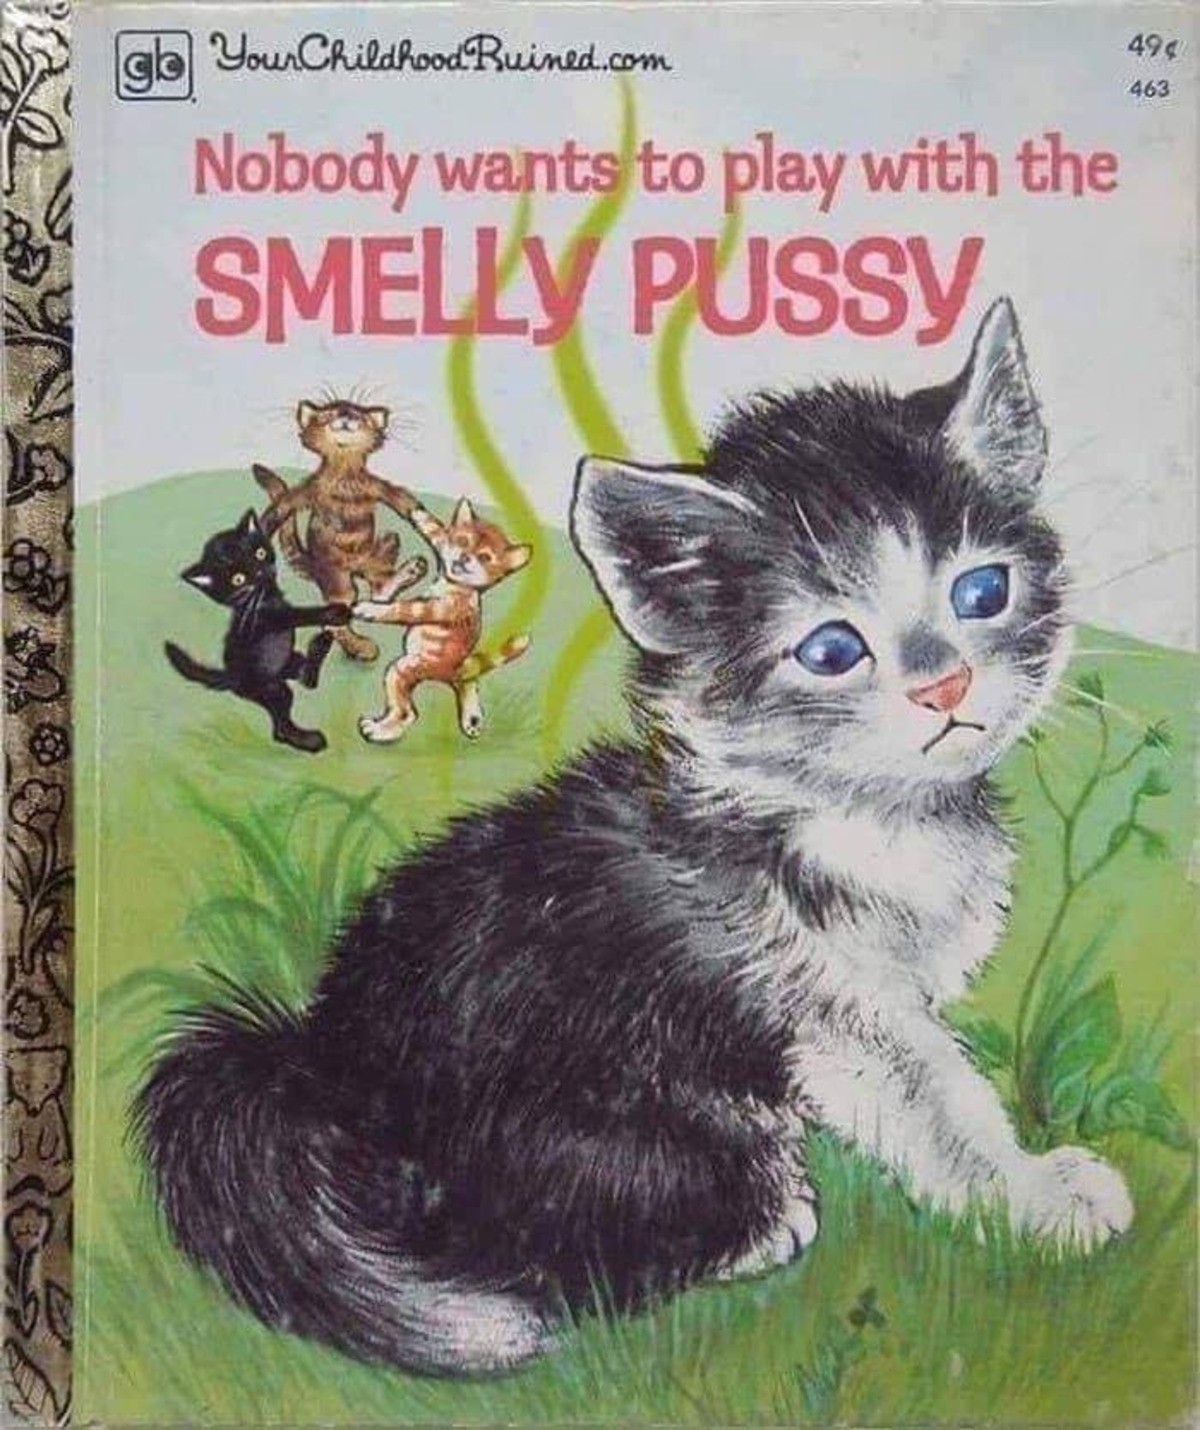 Remember your first smell pussy